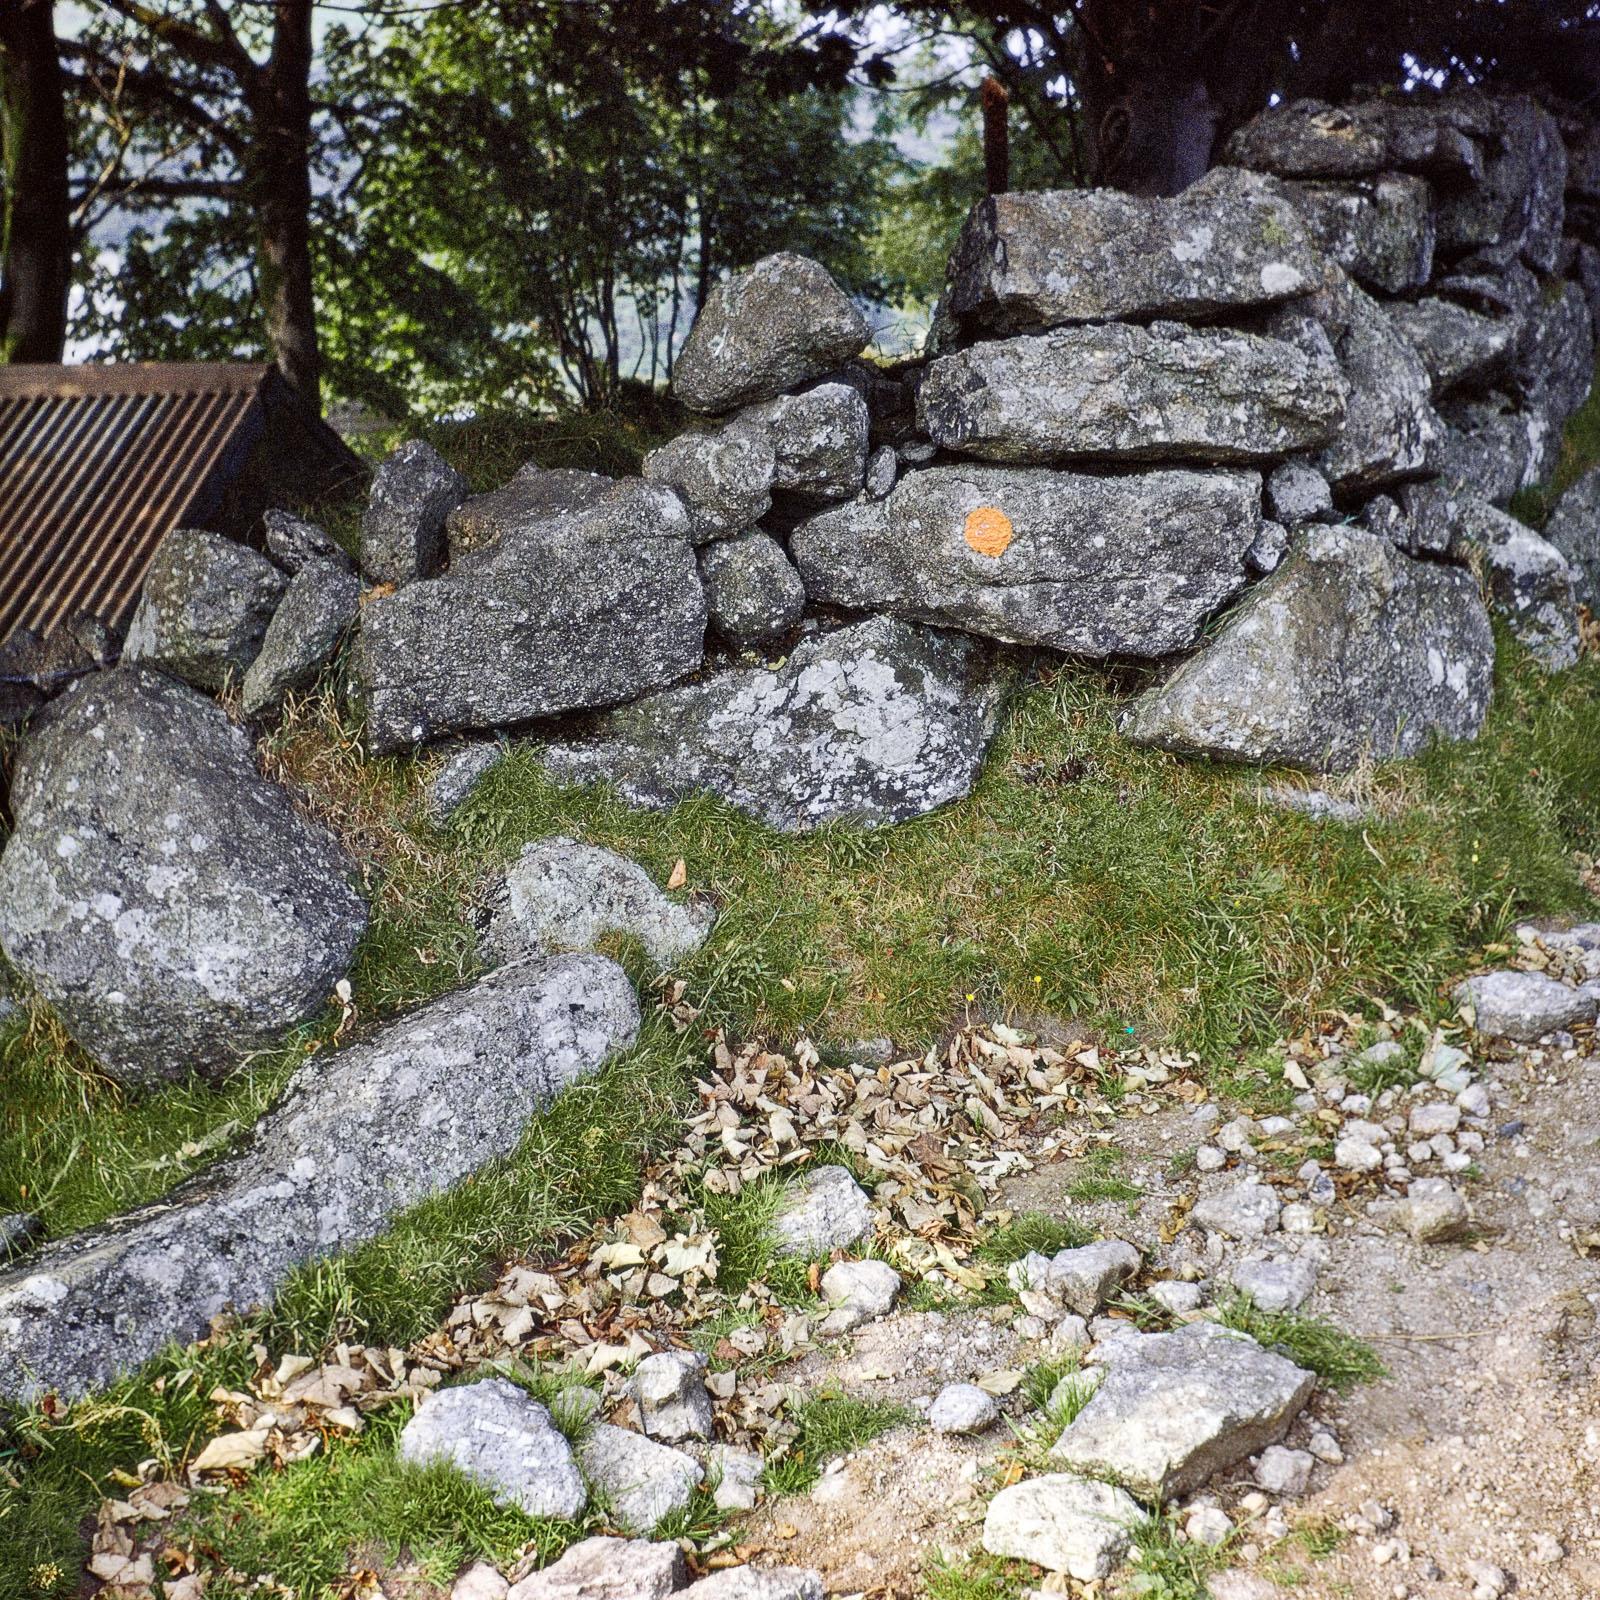 a pile of stones with a small orange circle painted on large rock near the center of the image